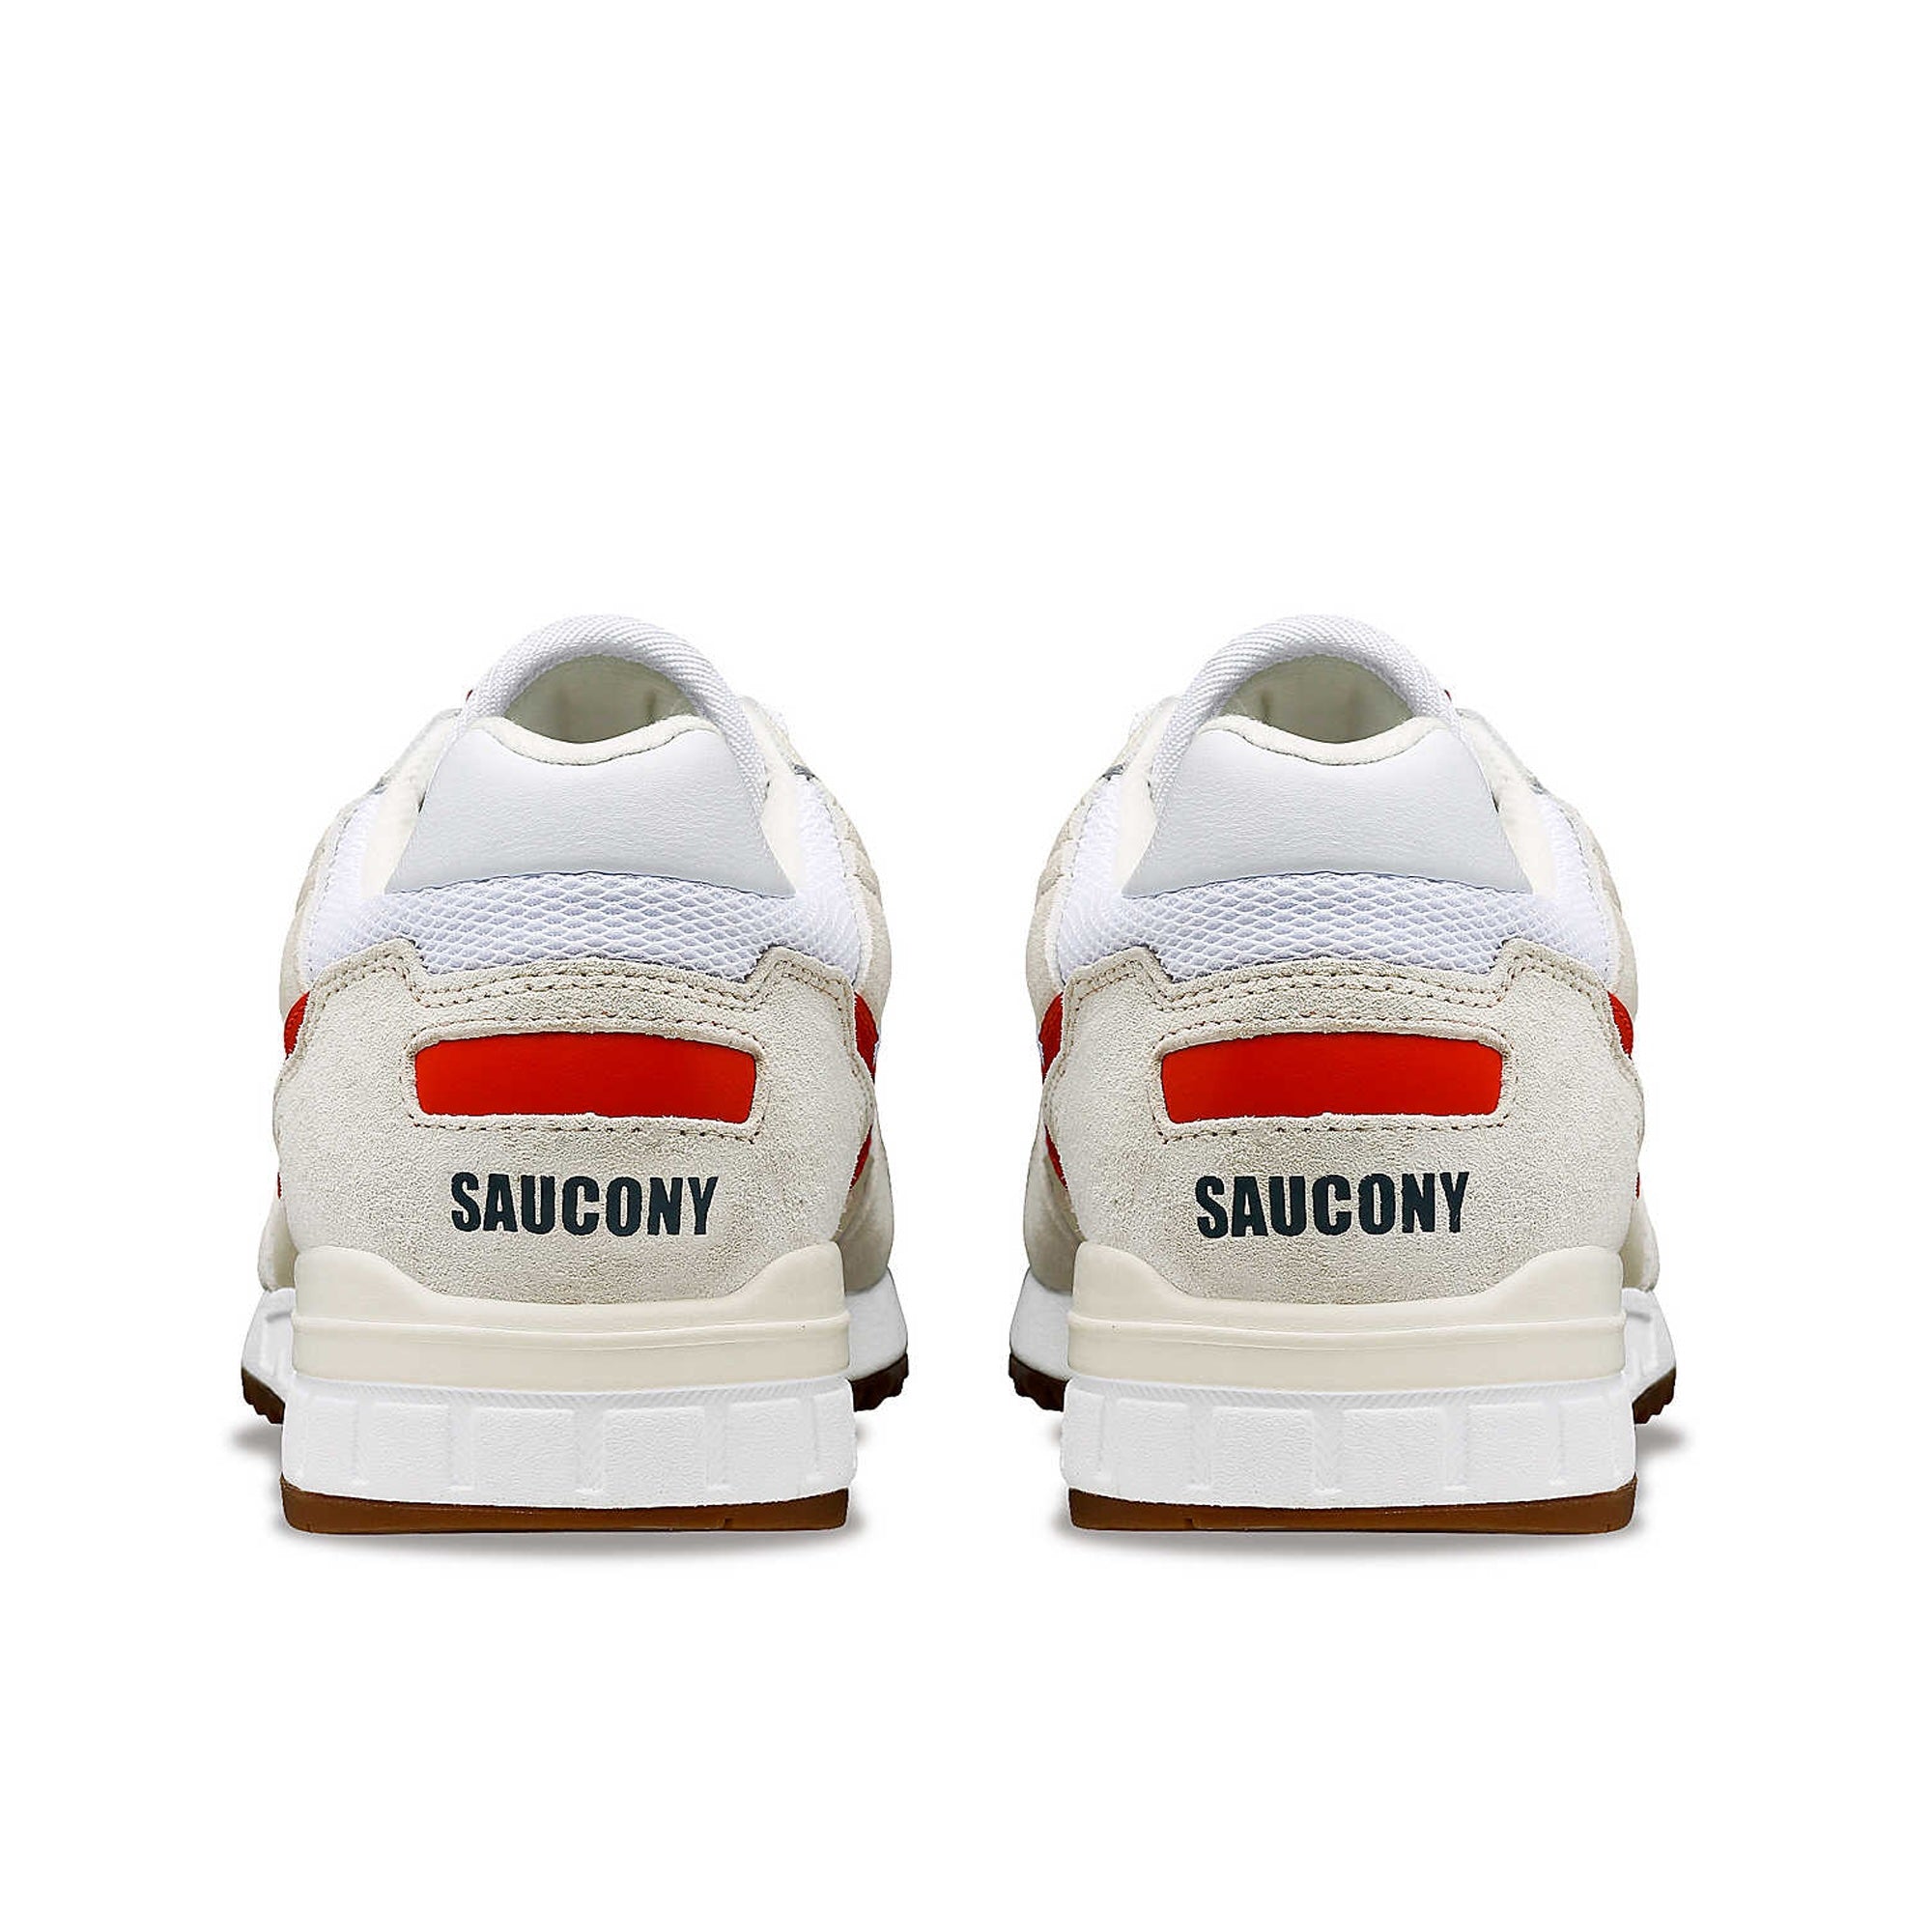 Saucony Shadow 5000 Premium "Ivy Prep Pack" Trainers - White/Red